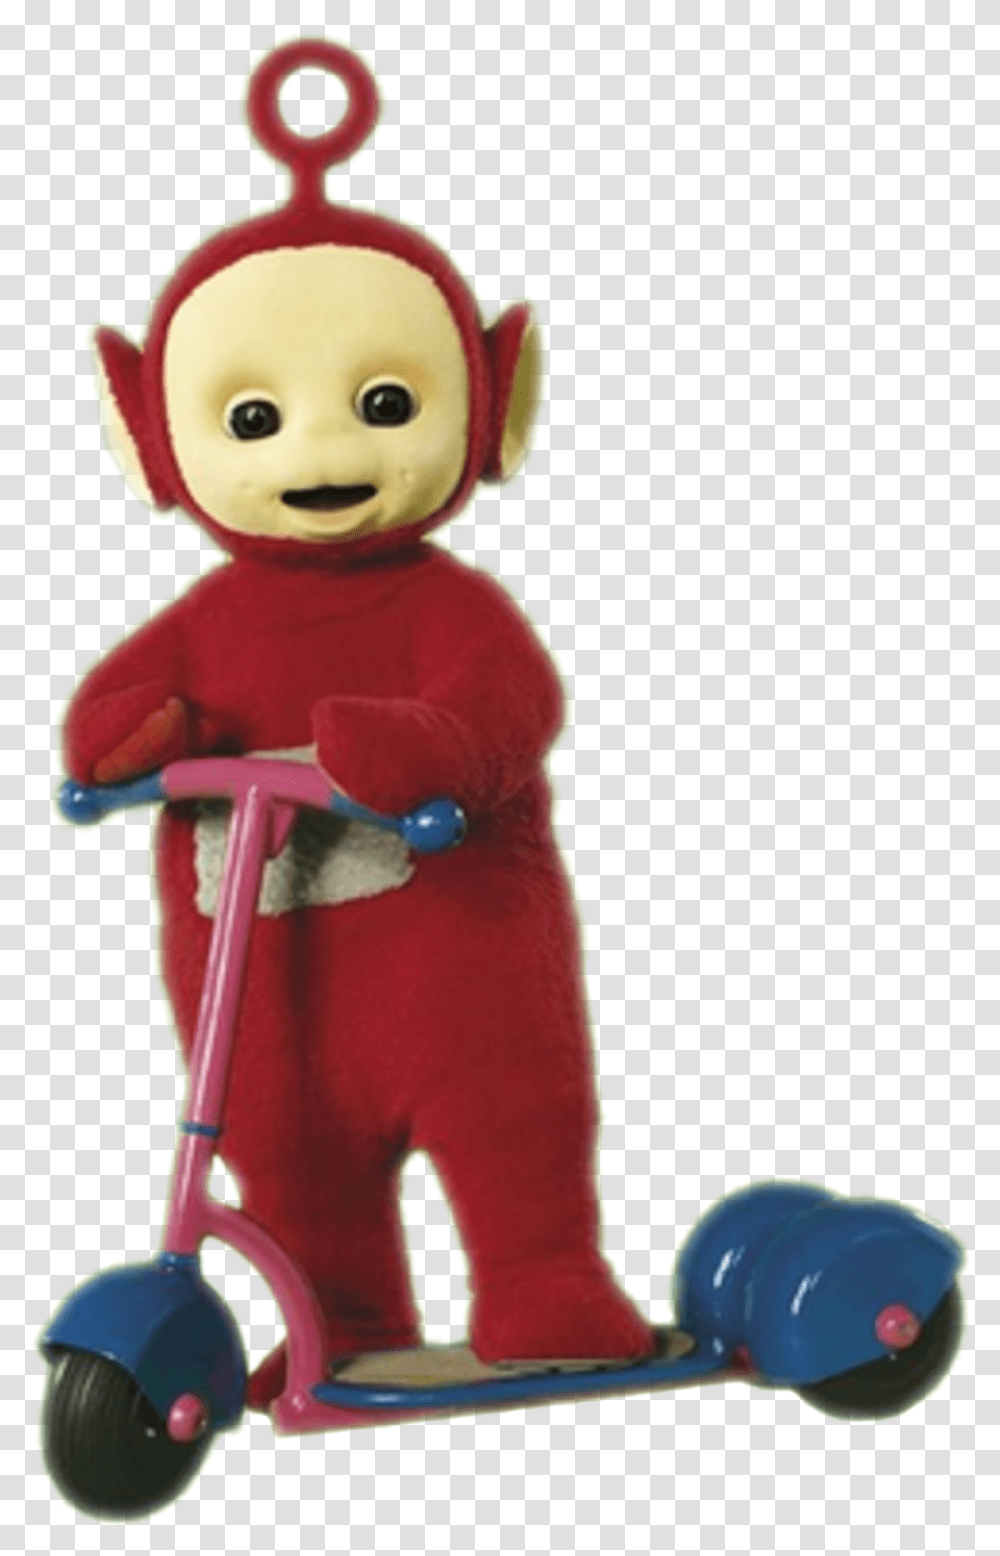 Teletubbies Po S Scooter2 Teletubbies Po Scooter Toys, Doll, Figurine Transparent Png